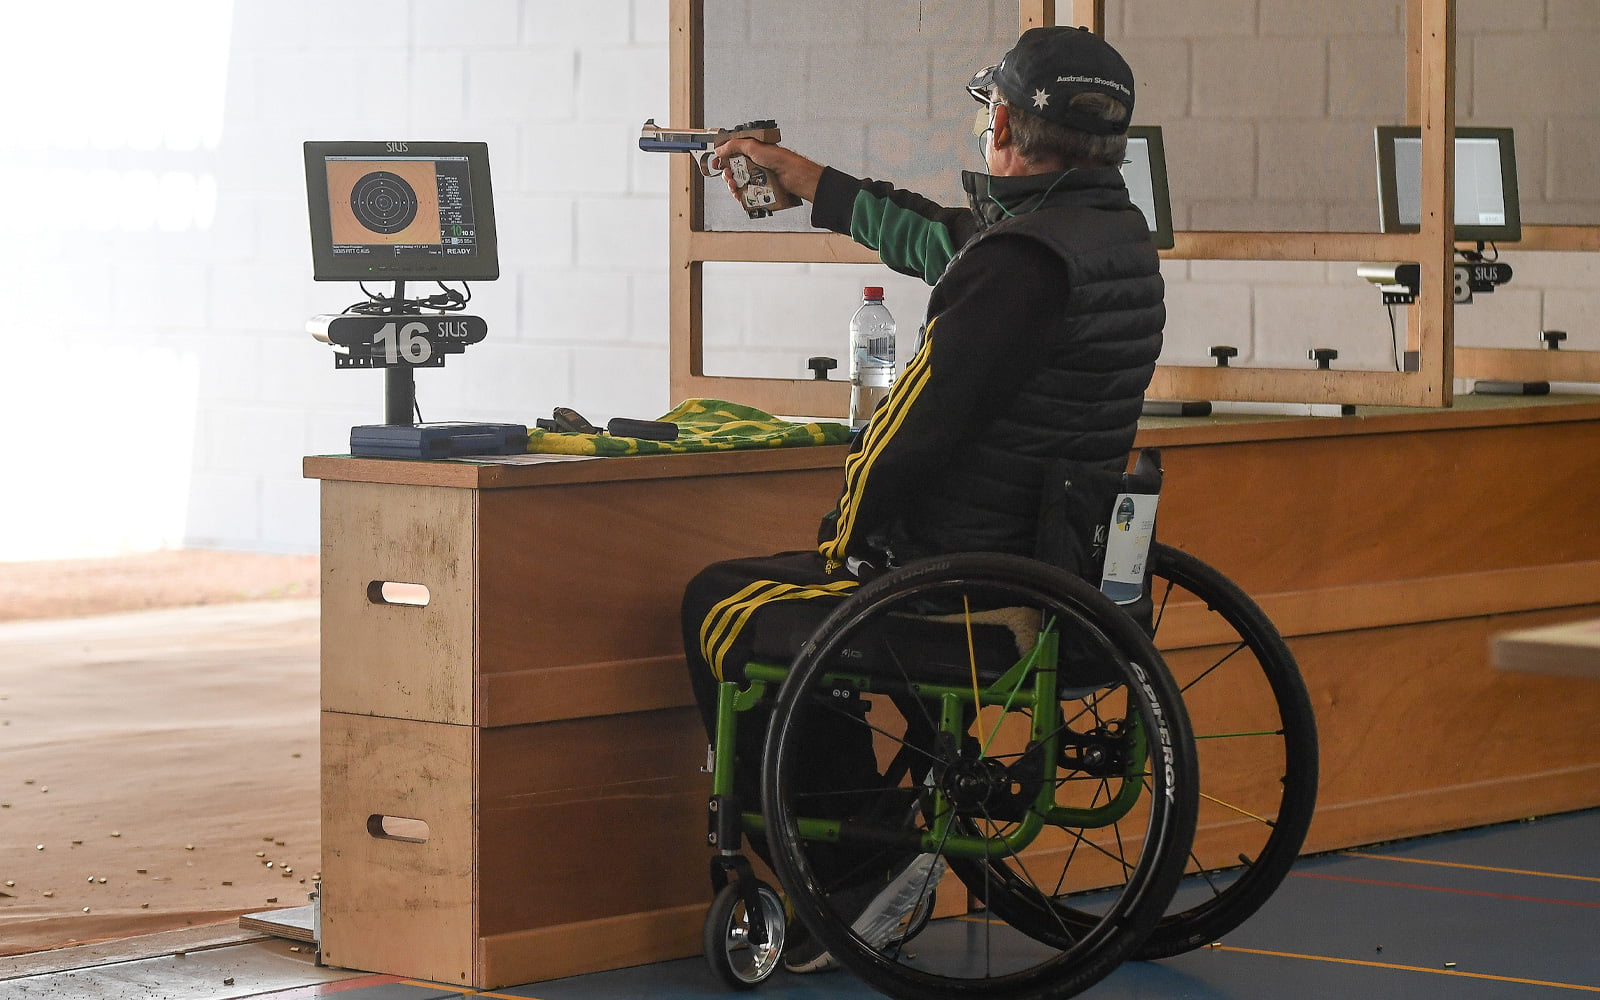 Shooting Australia Awarded Paralympic Pathway Grant